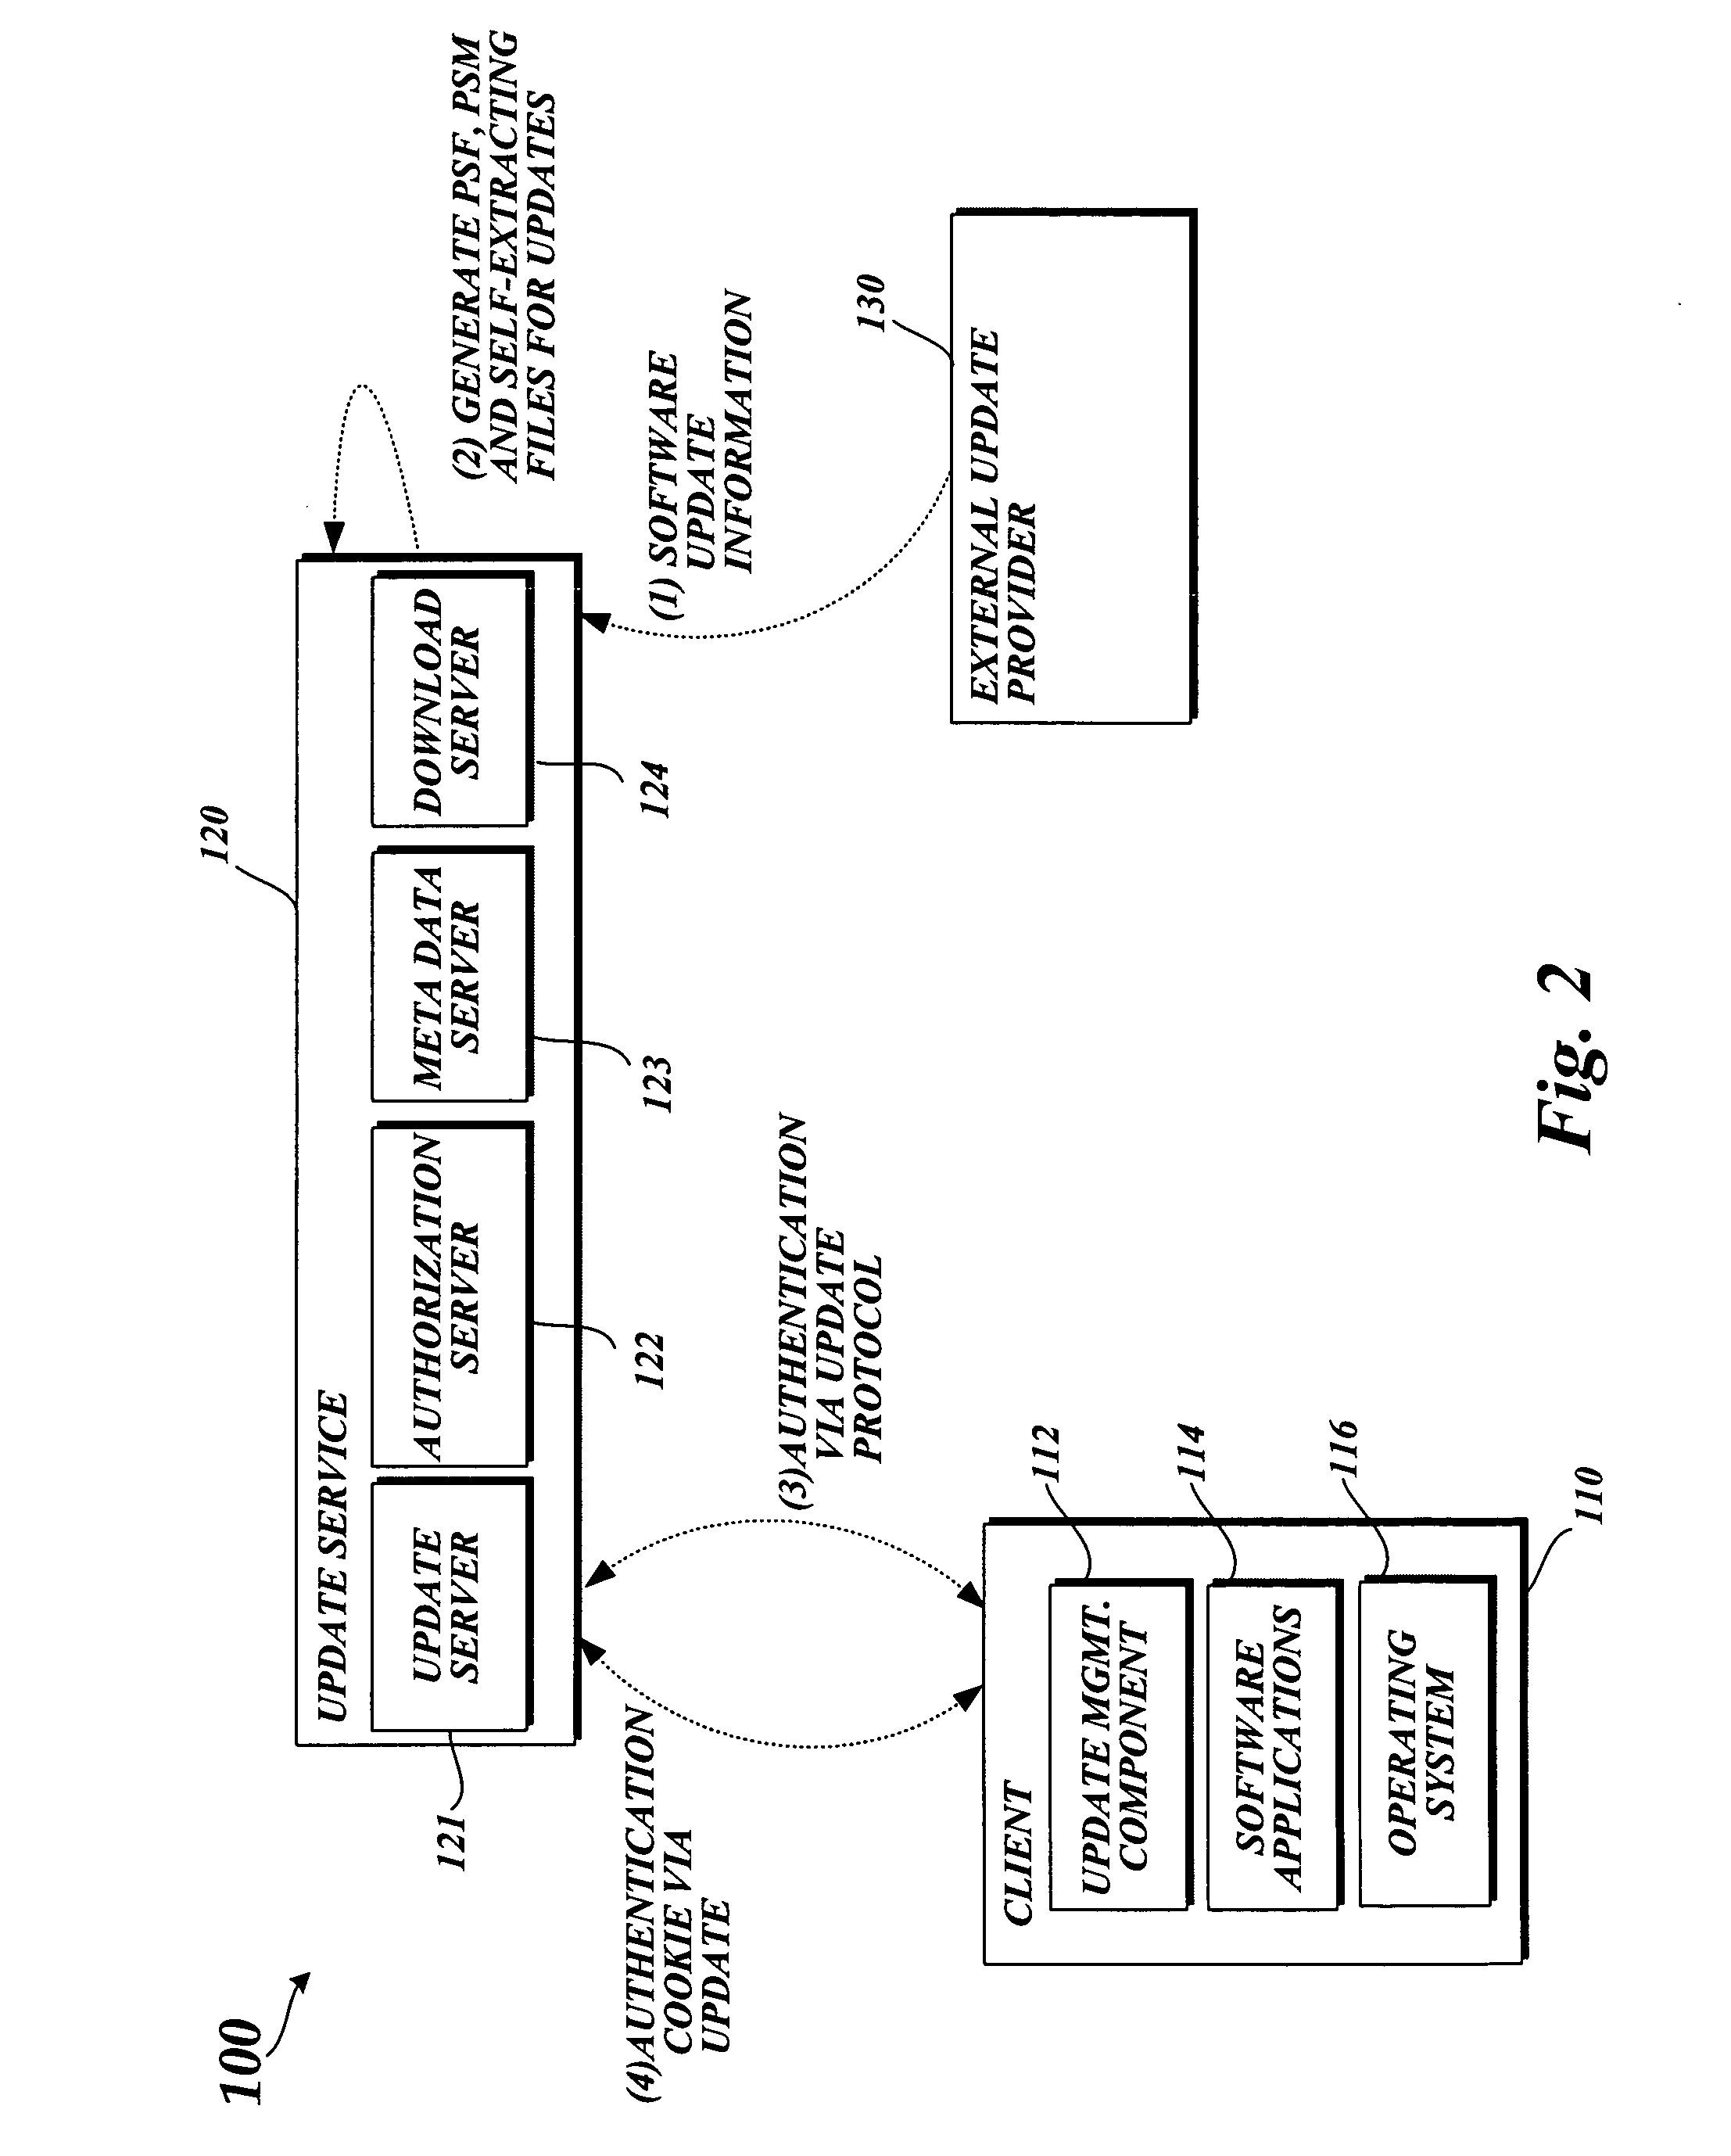 System and method for managing and communicating software updates